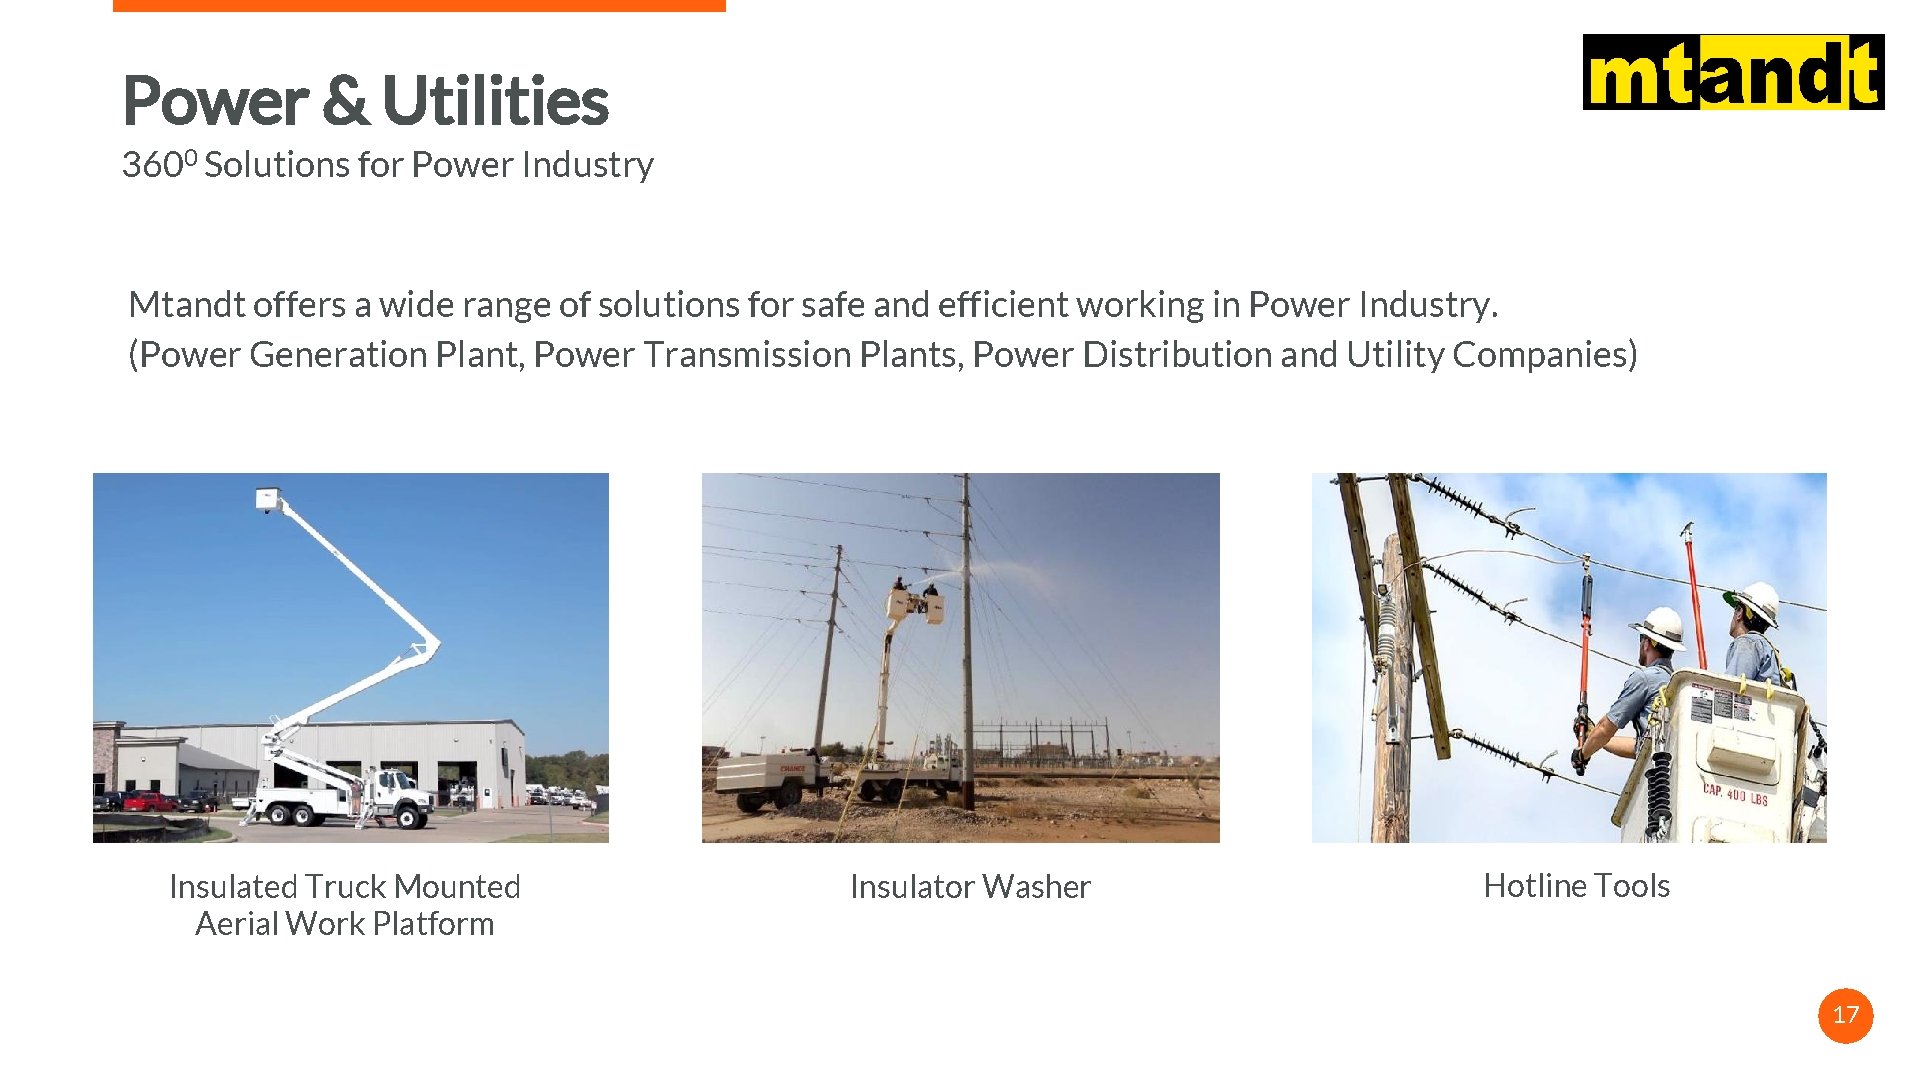 Power & Utilities 3600 Solutions for Power Industry Mtandt offers a wide range of